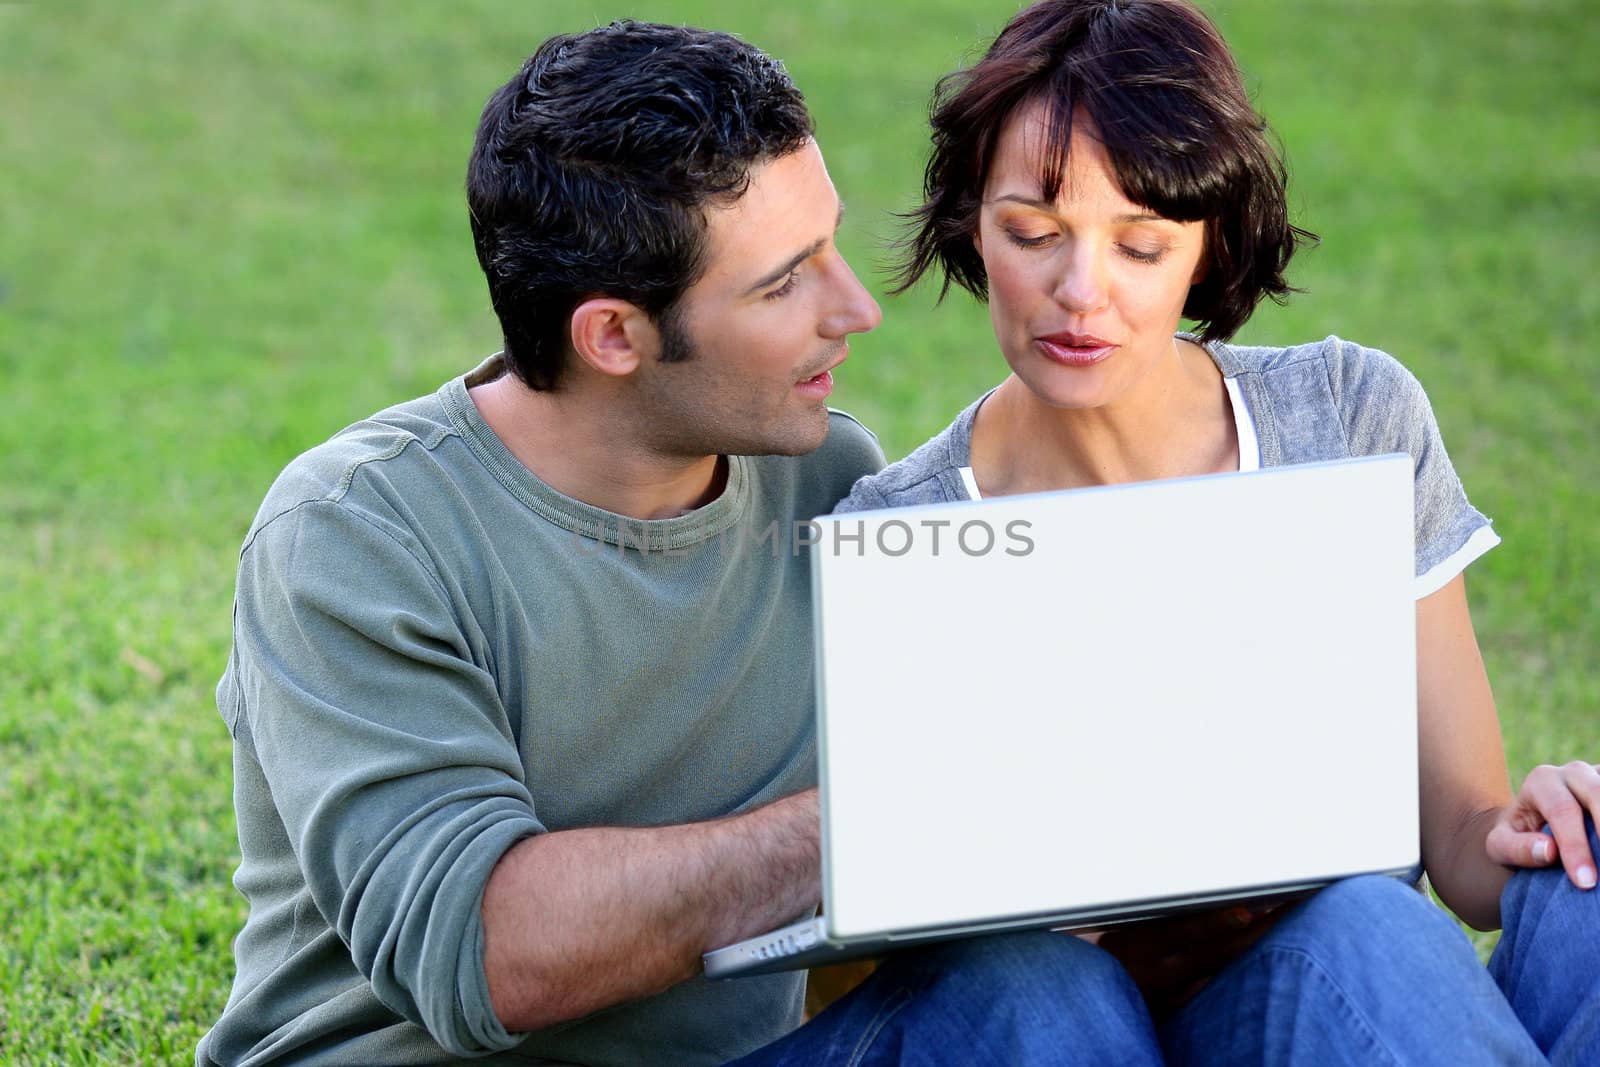 Couple making use of free wifi in the park by phovoir